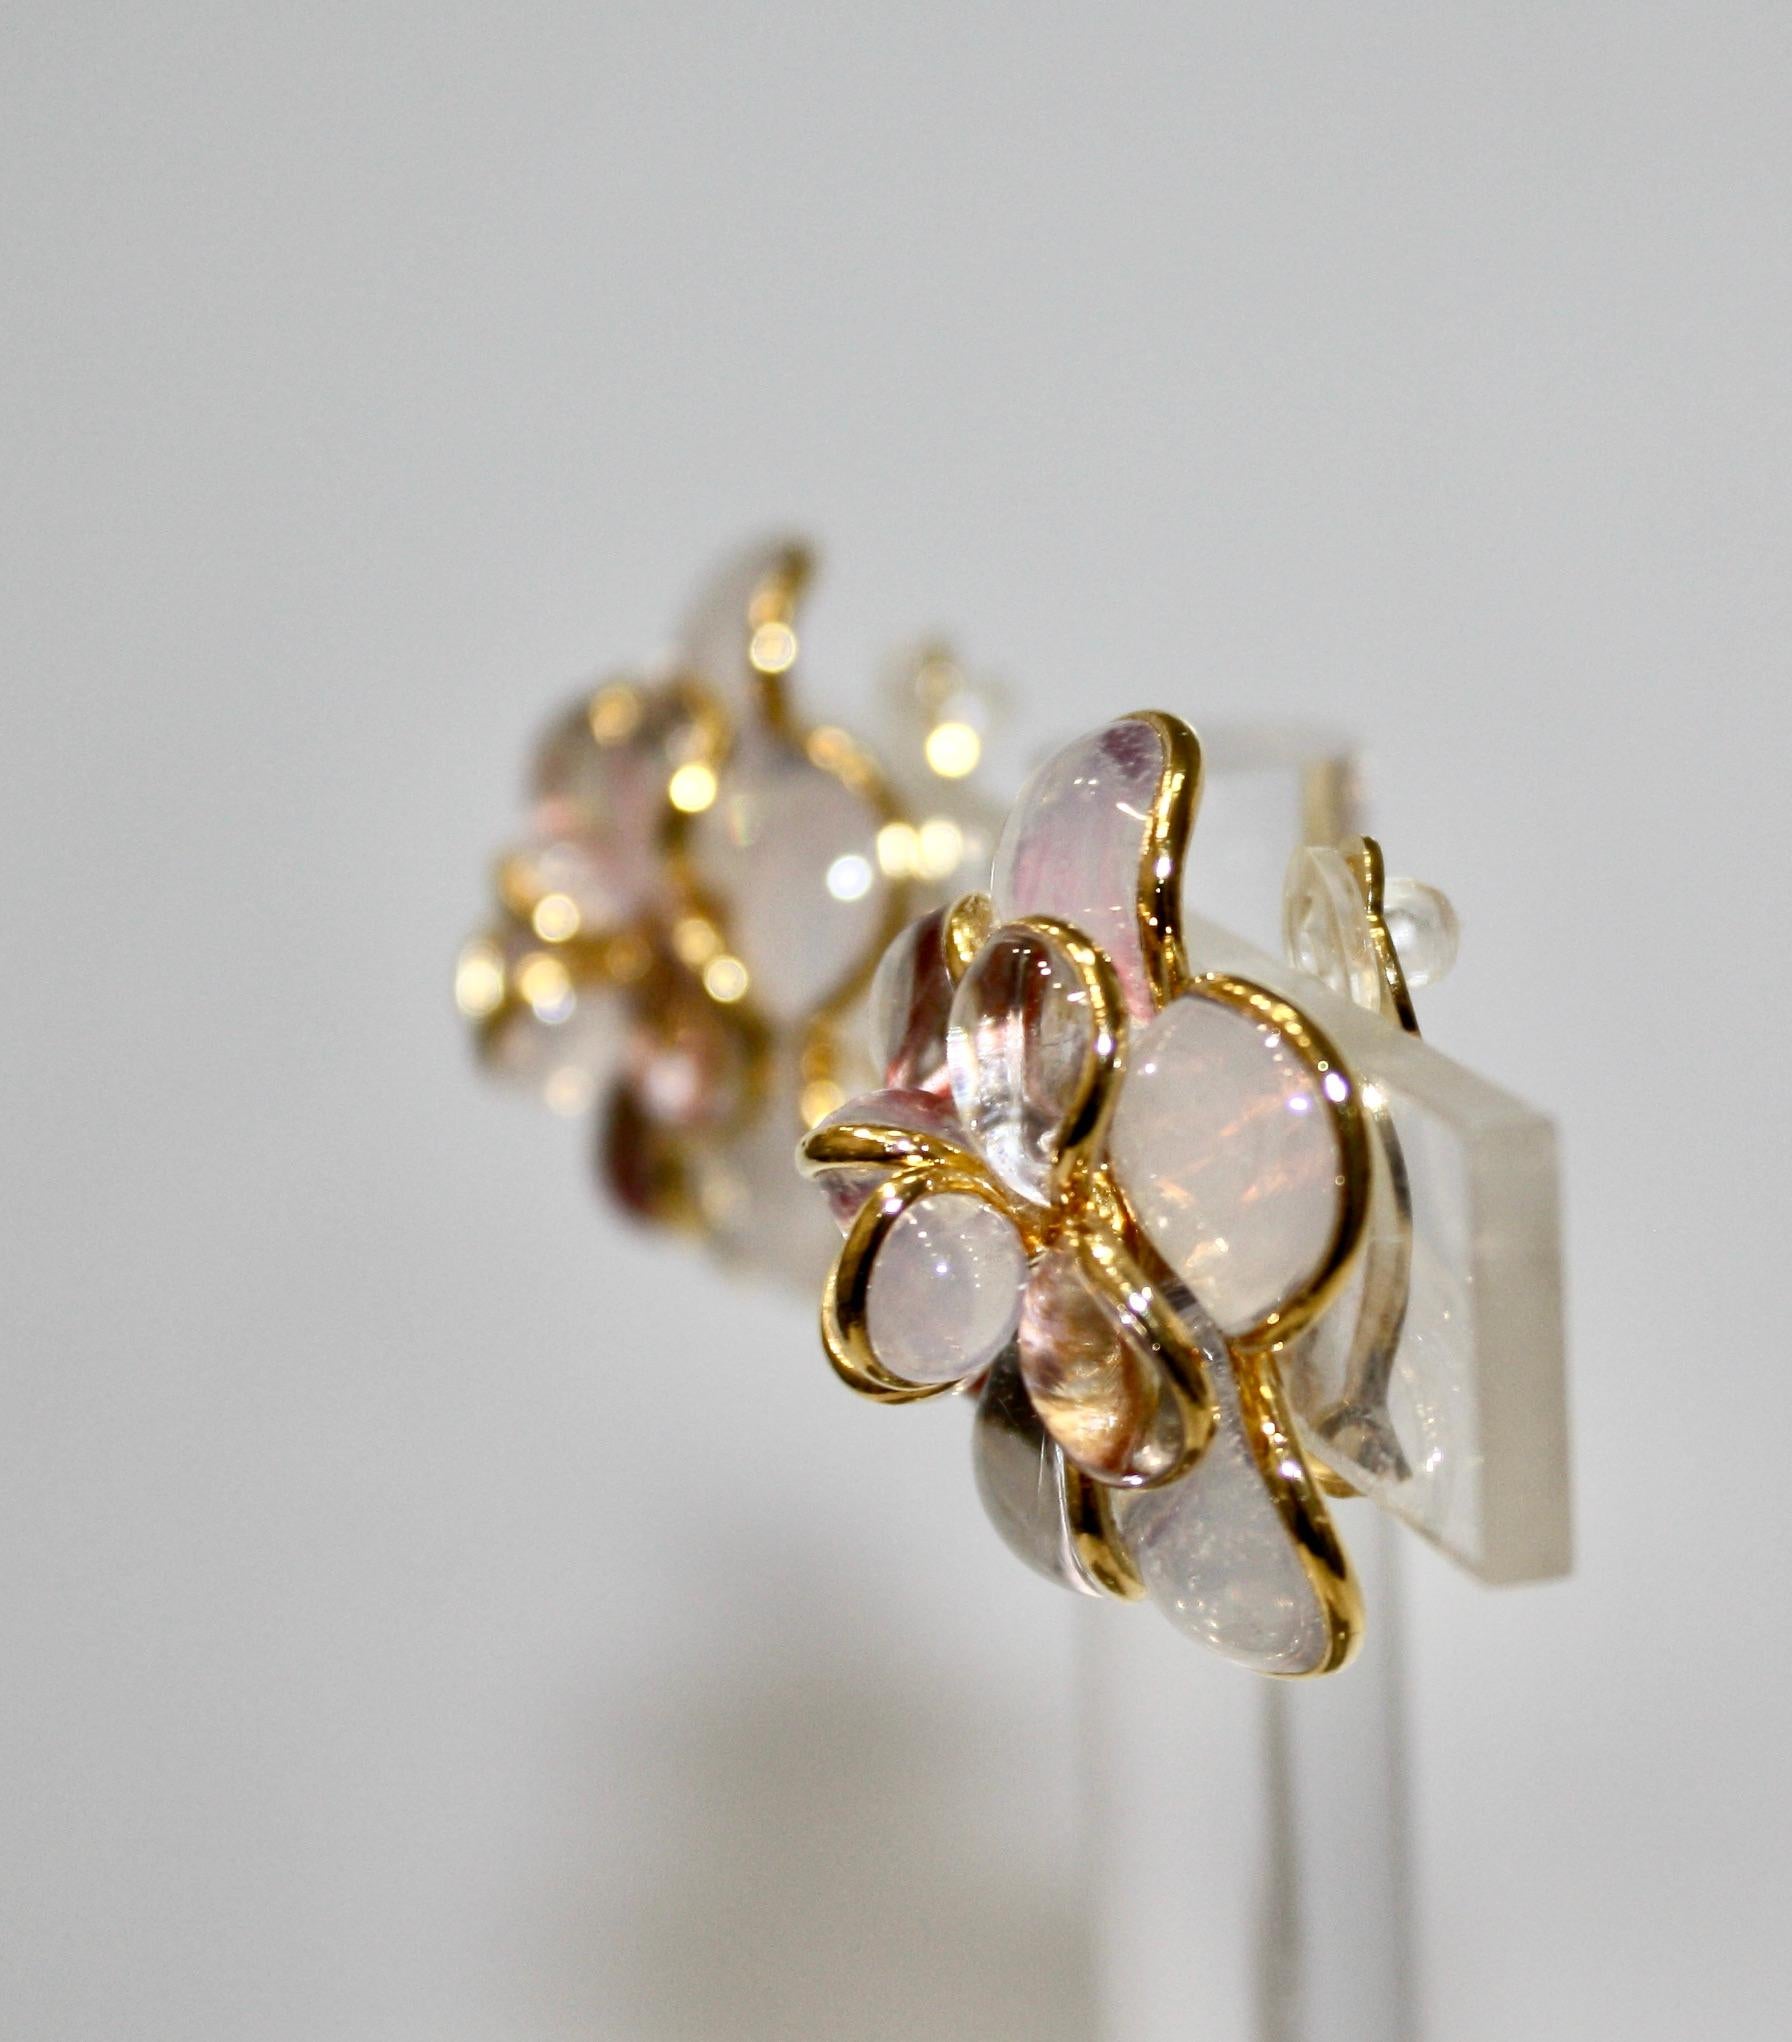 designed by the former artisans of the atelier of Gripoix, made in the special process of pate de verre or poured glass. Gold leaves are inserted in the glass. 18-carat gilded brass.
Clip earrings 